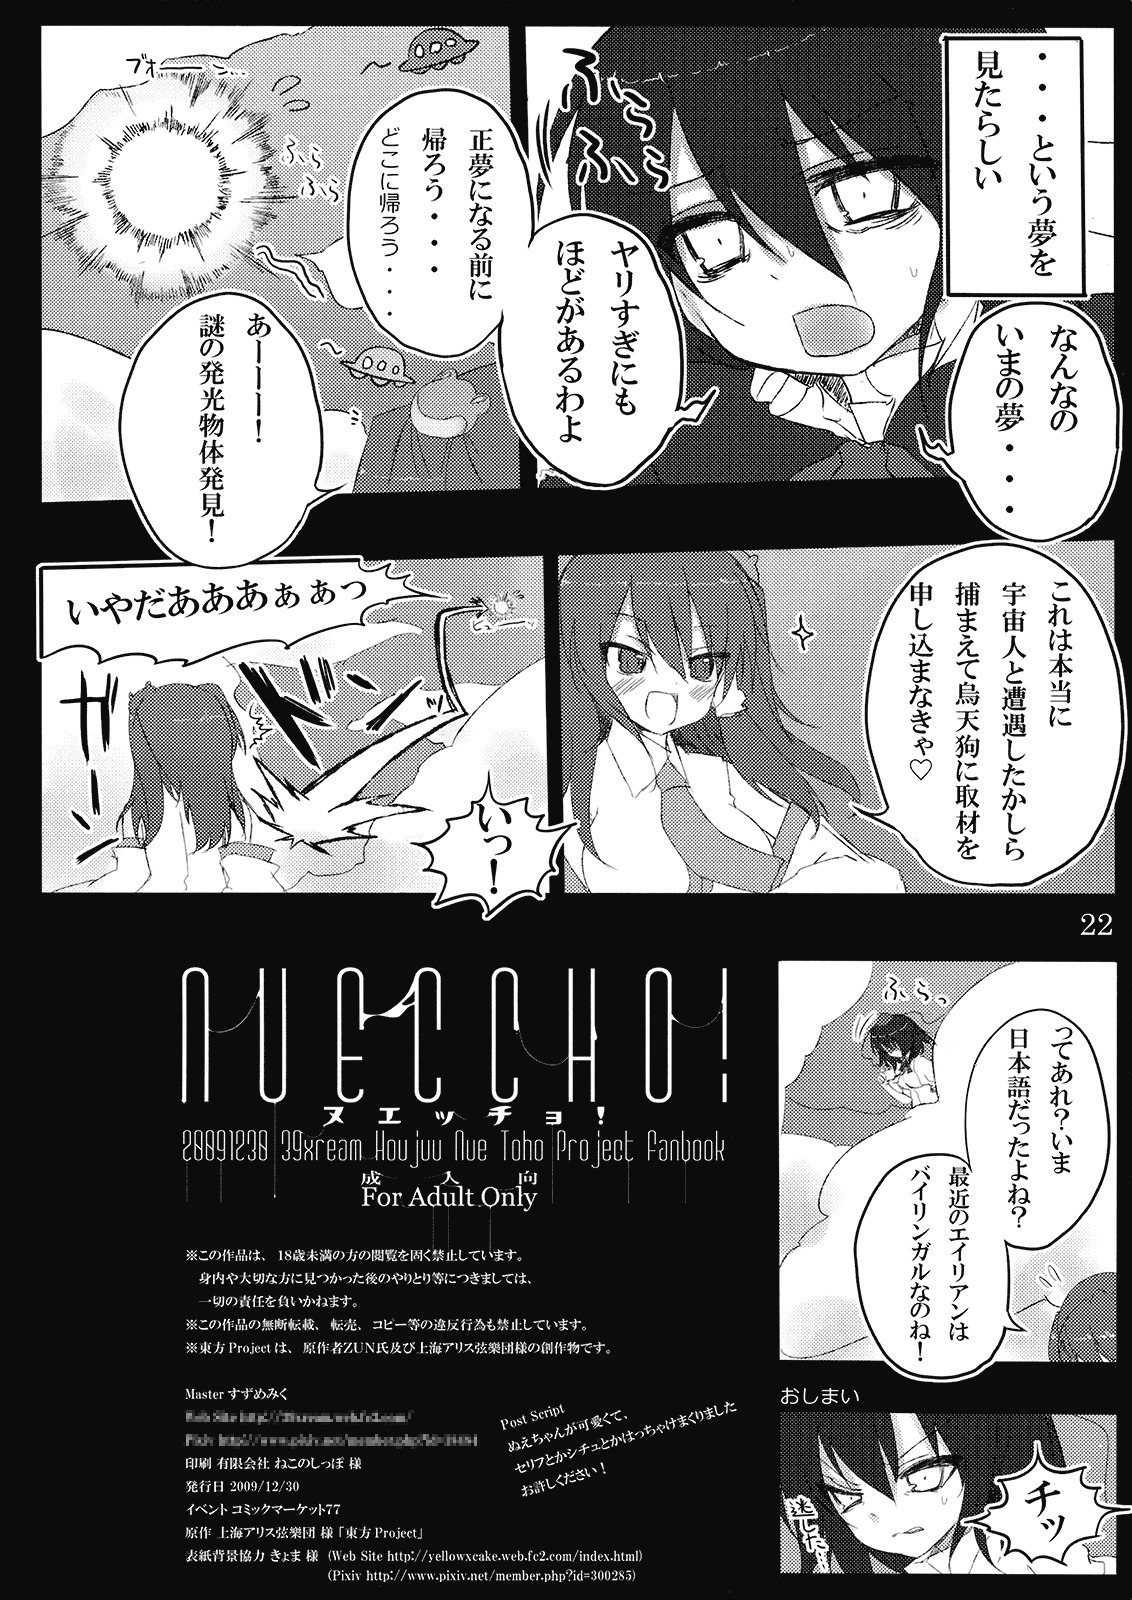 (C77) [39xream (Suzume Miku)] Nueccho! (Touhou Project) page 21 full